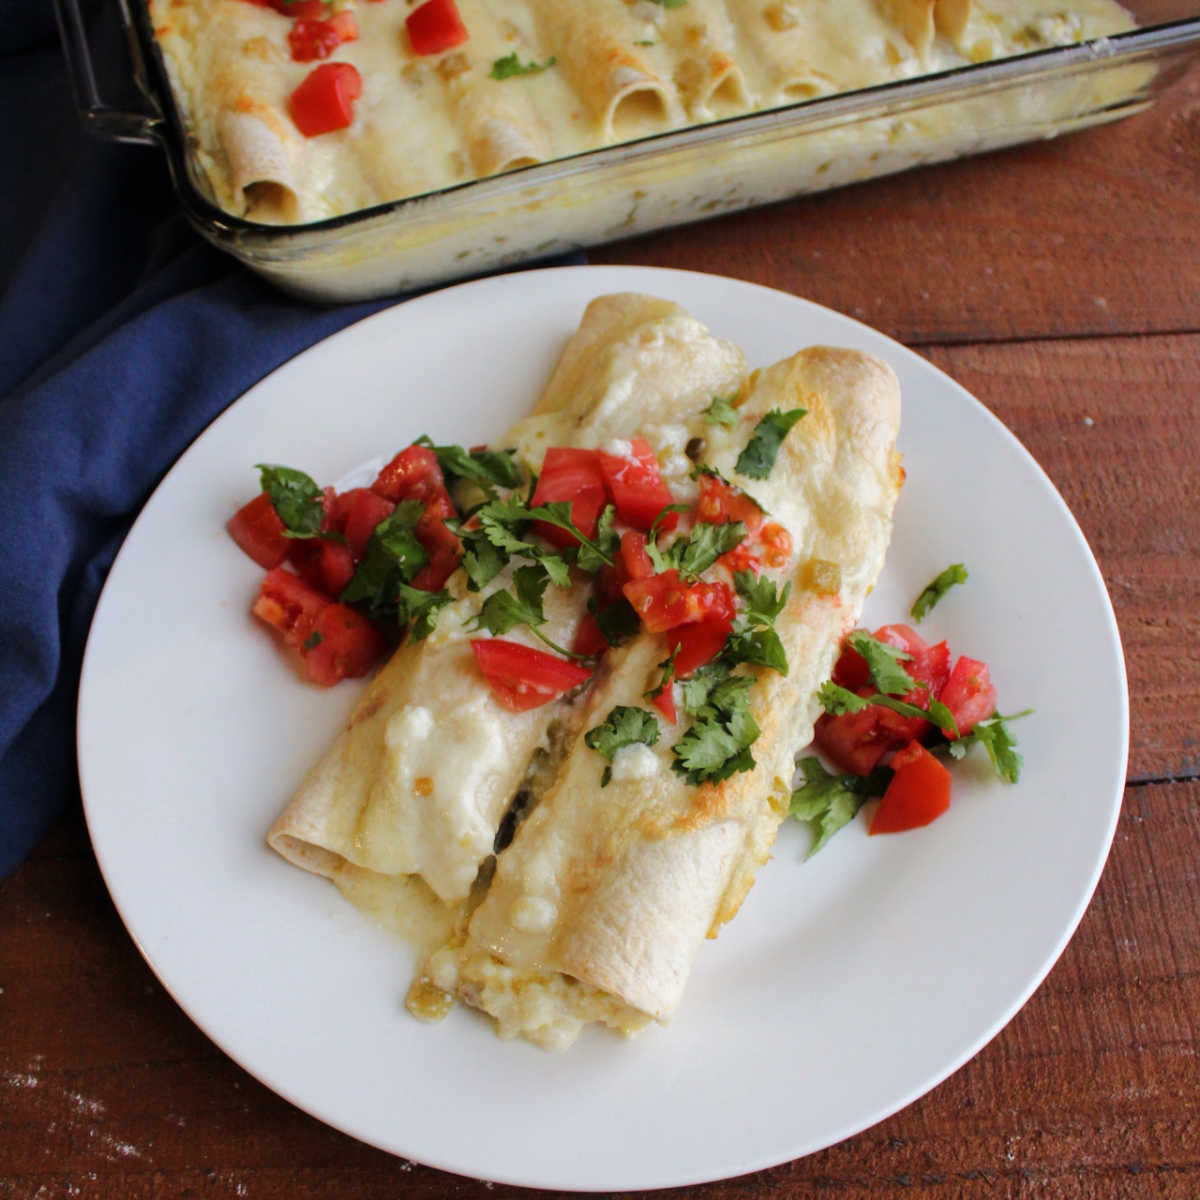 Plate with two breakfast enchiladas baked in creamy cheese sauce and topped with diced tomato and fresh cilantro, ready to eat. 